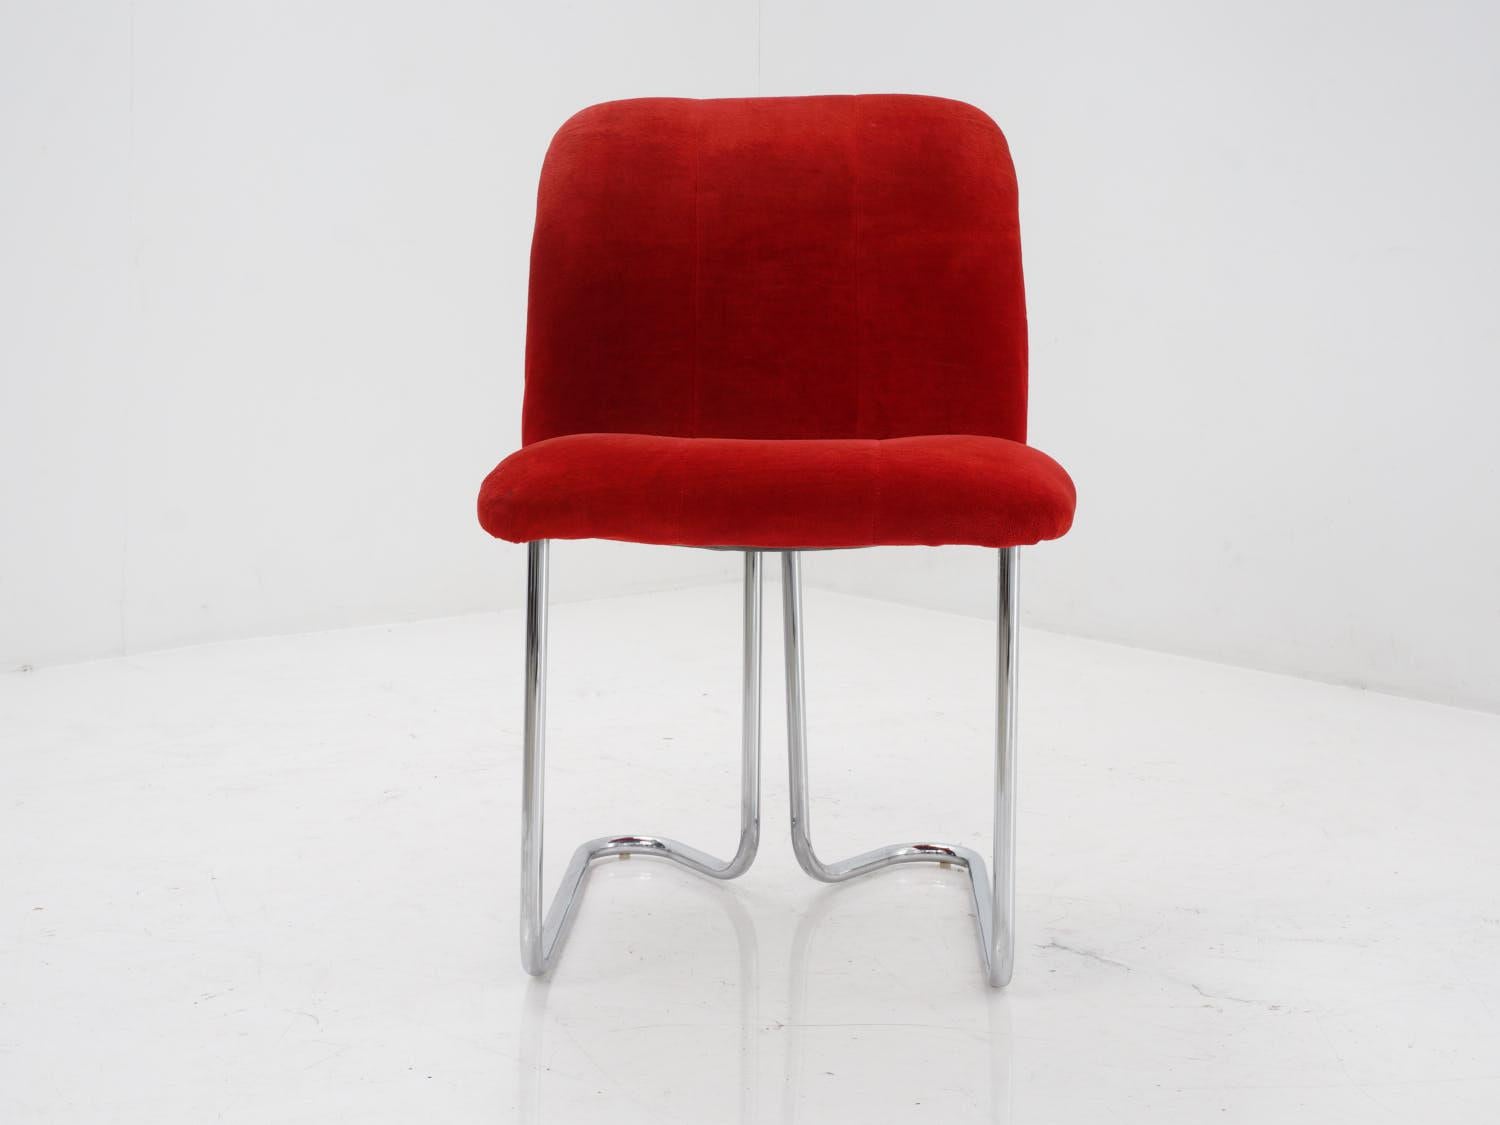 Sit down in this chair and you'll feel like a cool, retro spy with a license to chill.

- 31